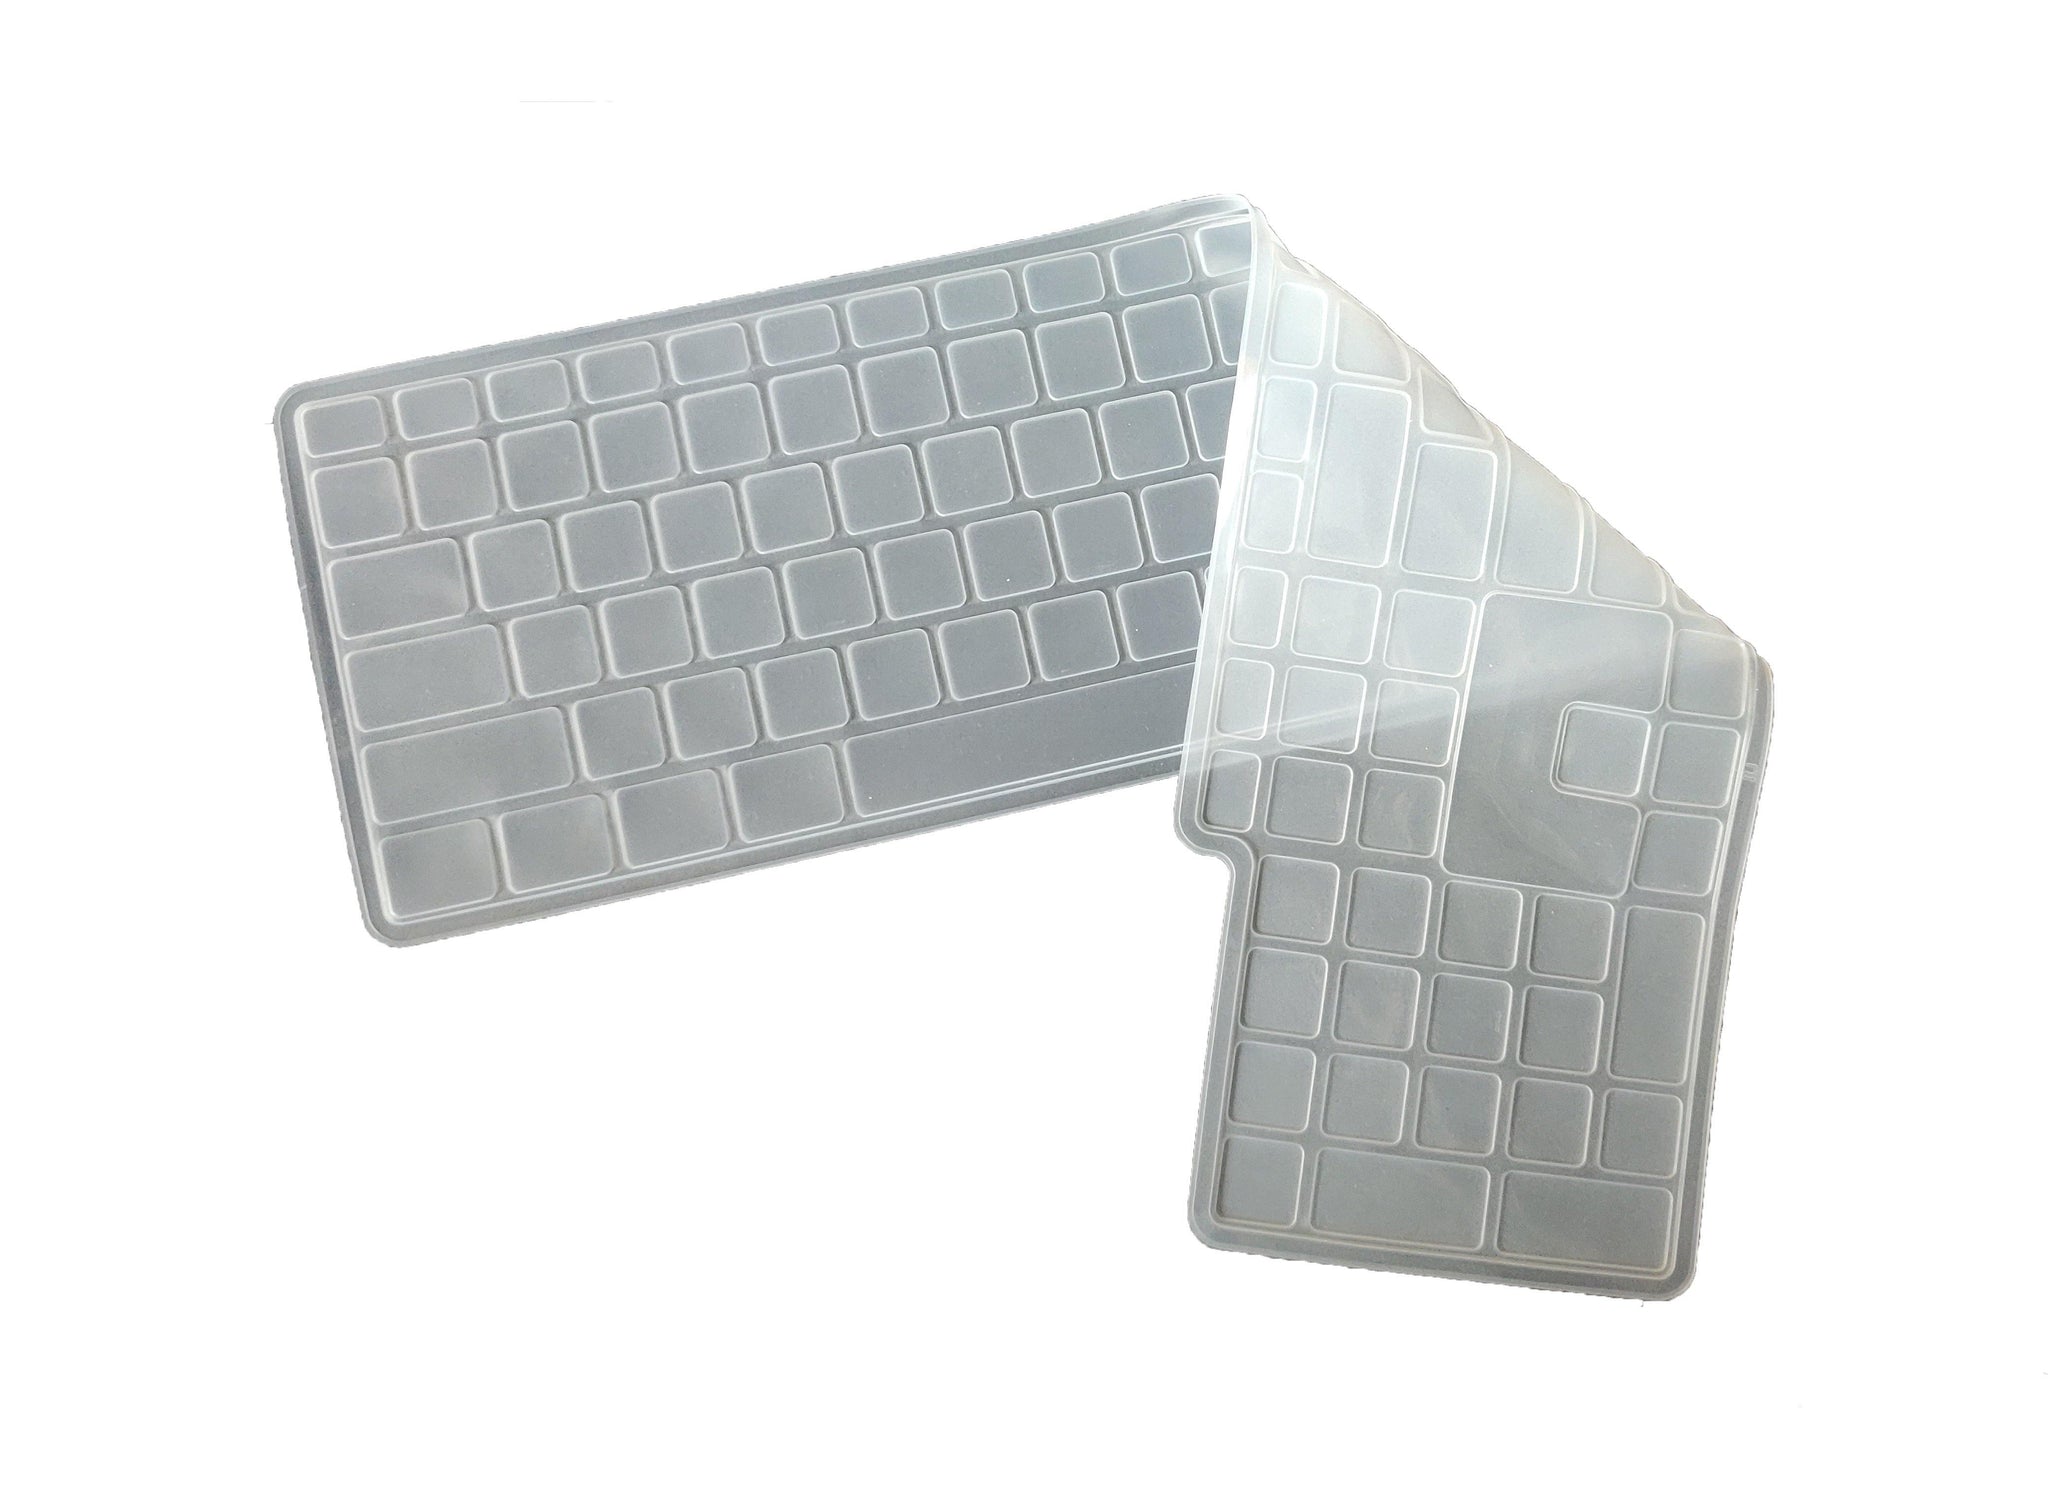 Silicone Keyboard Skin Cover for Dell KM117 Wireless Keyboard Wk118 (Transparent) - iFyx